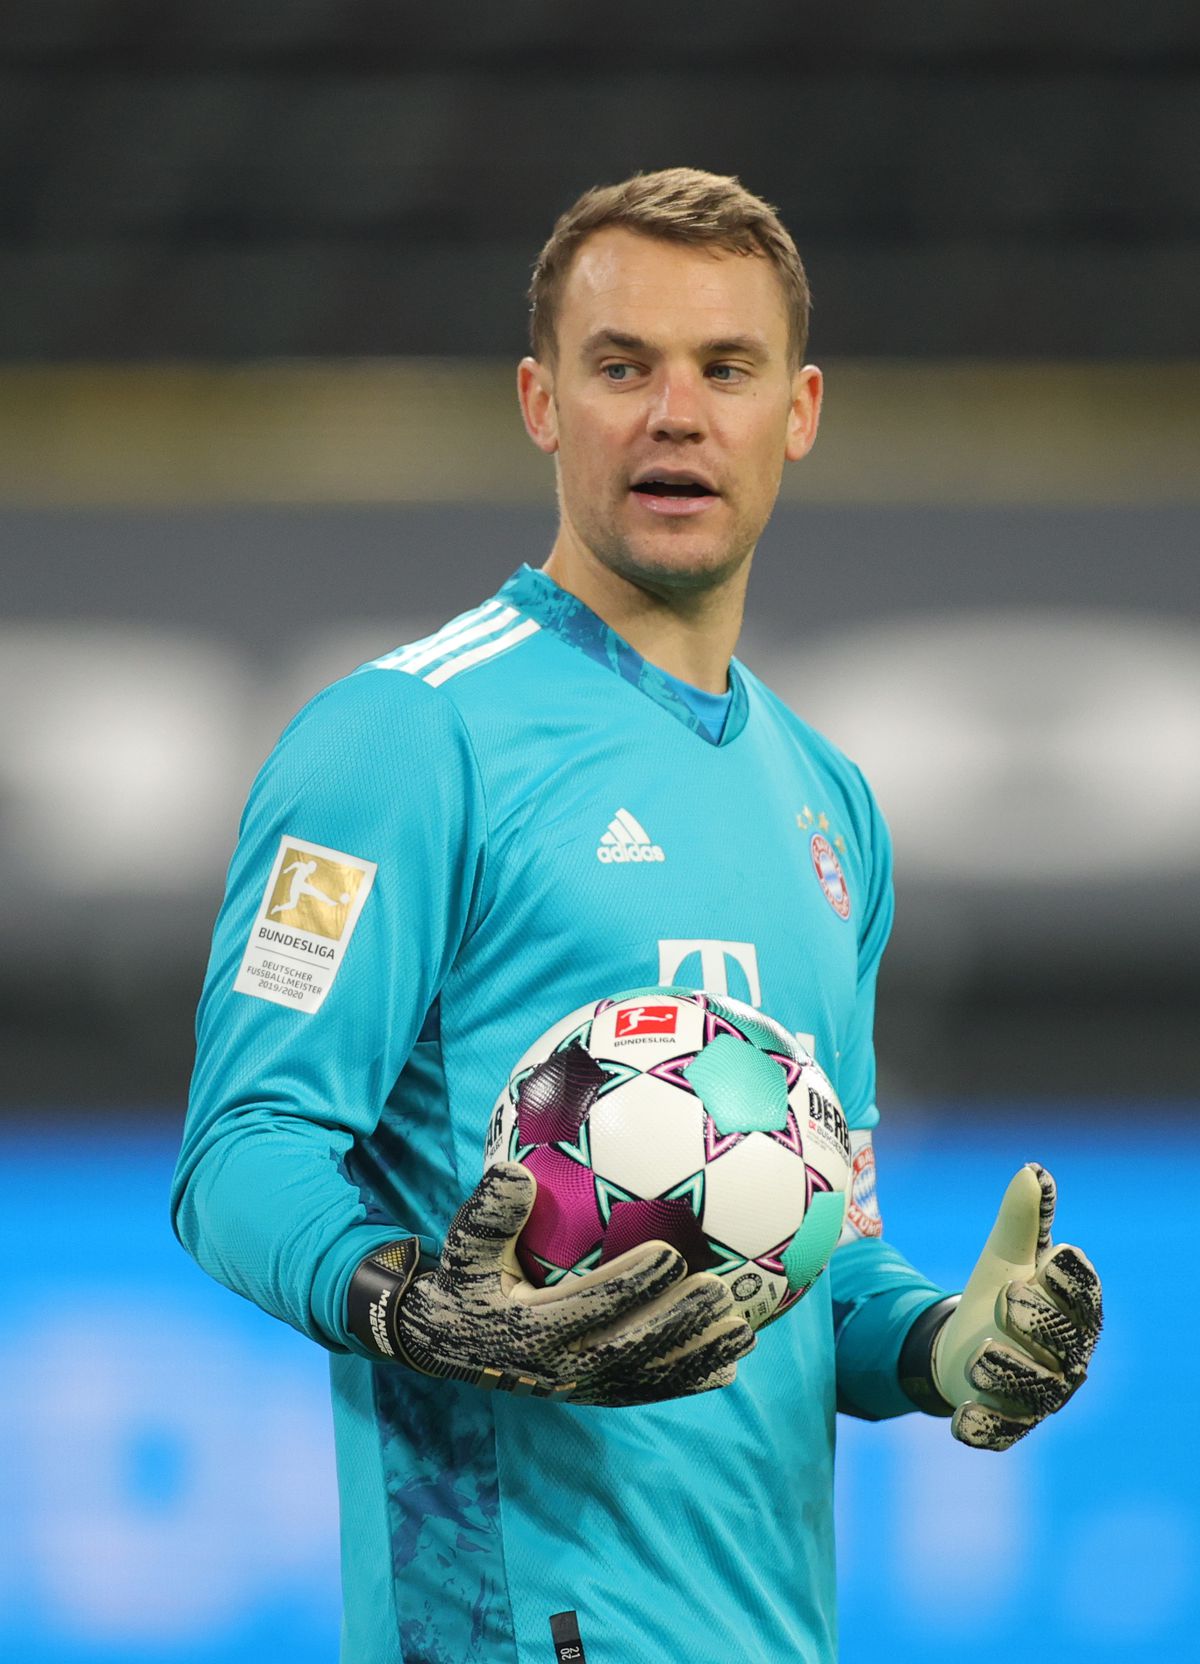 Bayern Munich’s Manuel Neuer talks about the challenges of this season